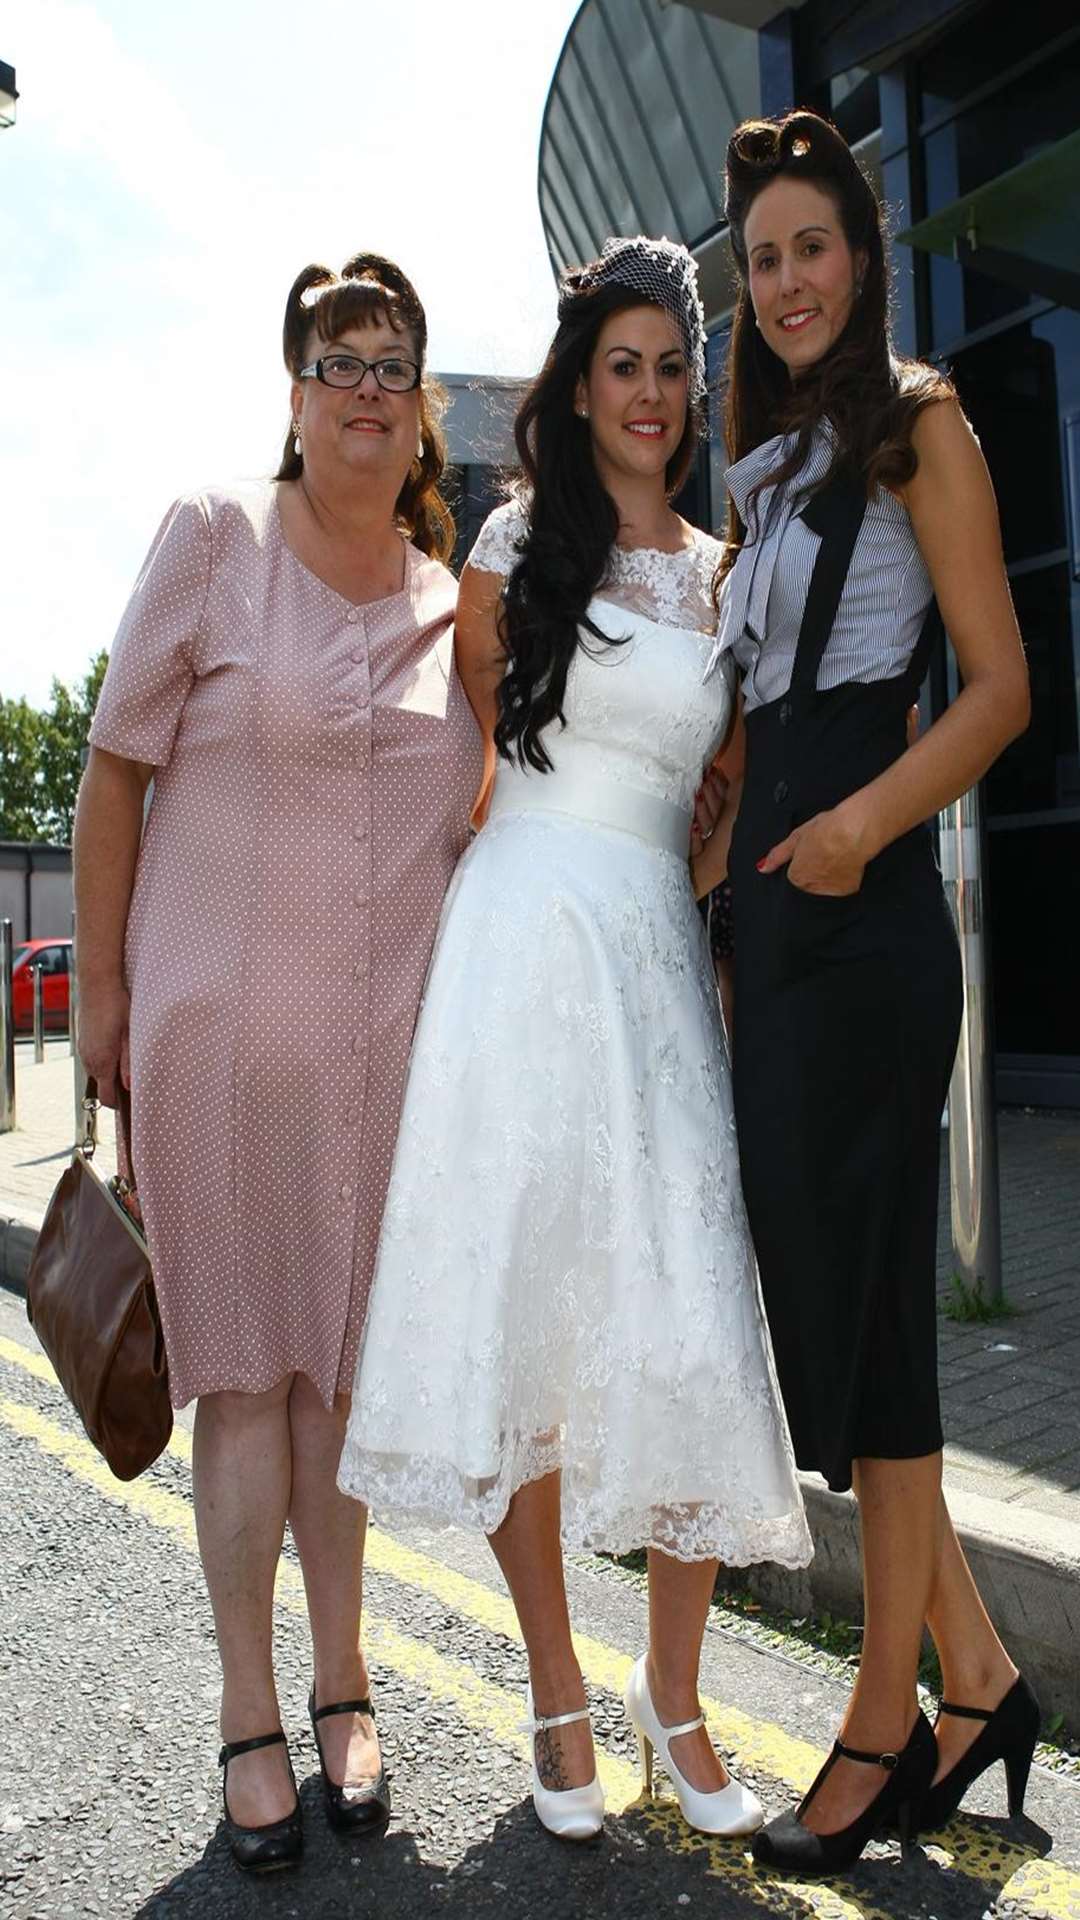 Mum and daughters in 1940s fancy dress